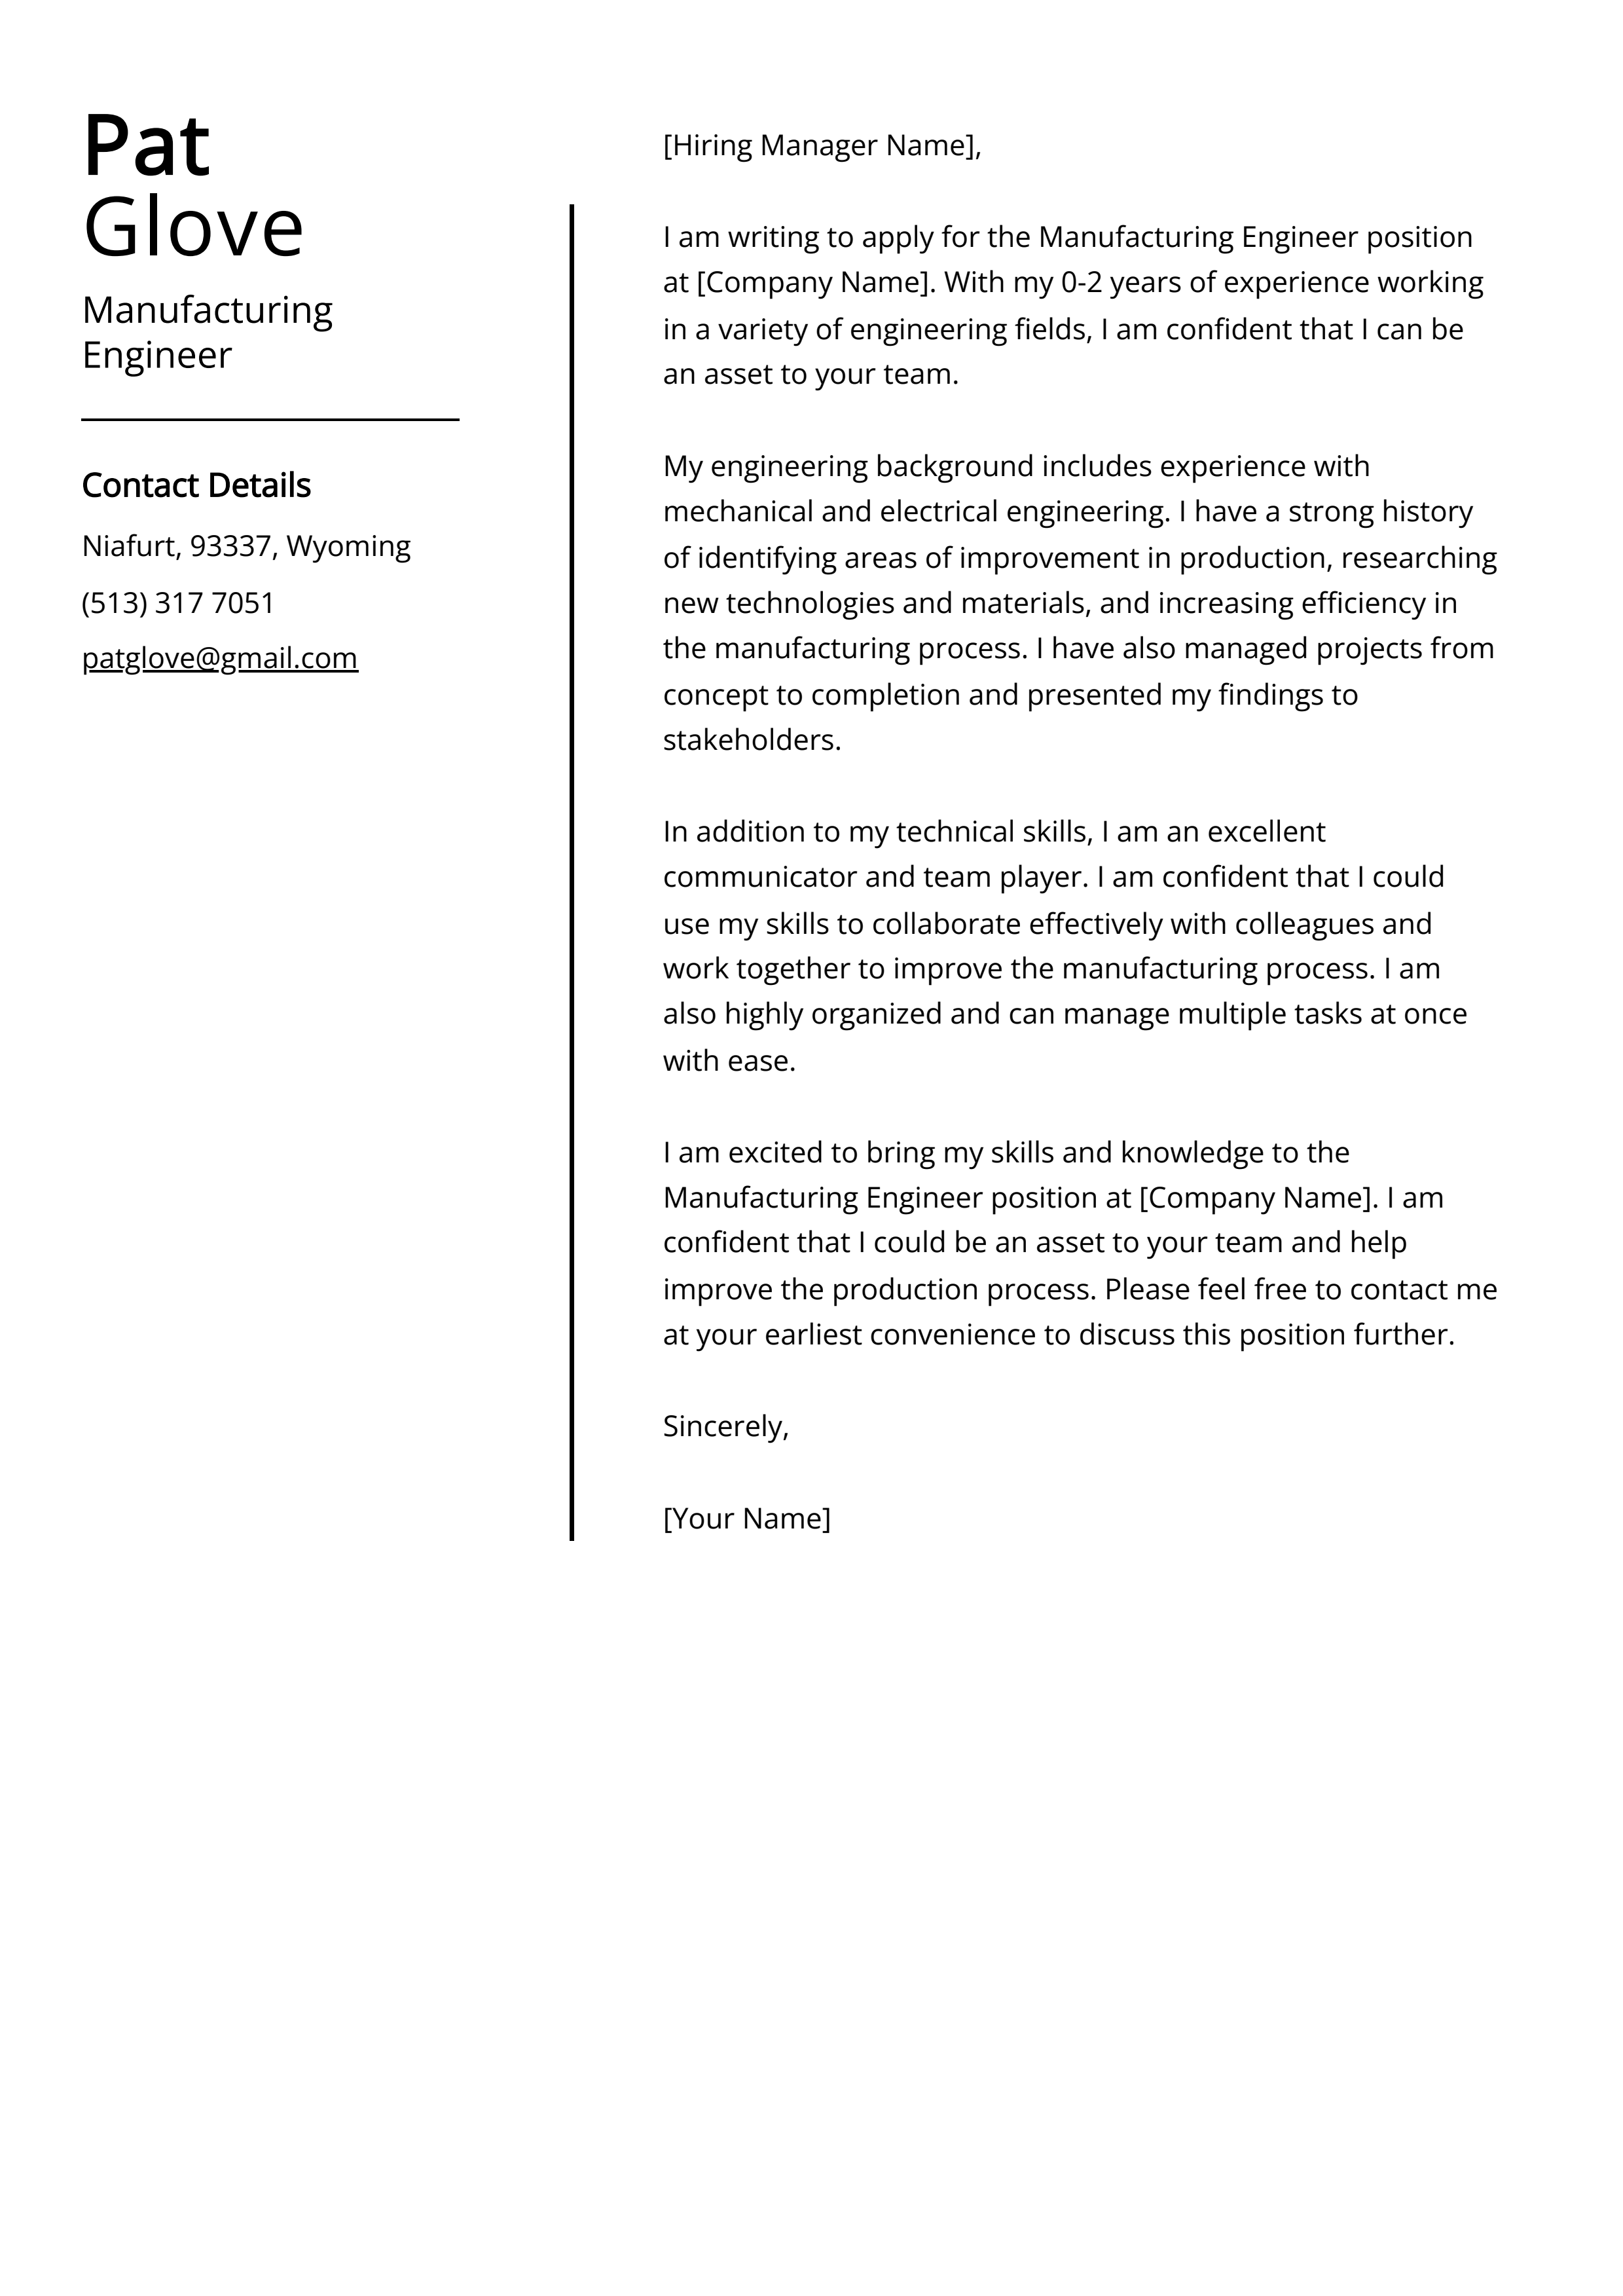 Manufacturing Engineer Cover Letter Example